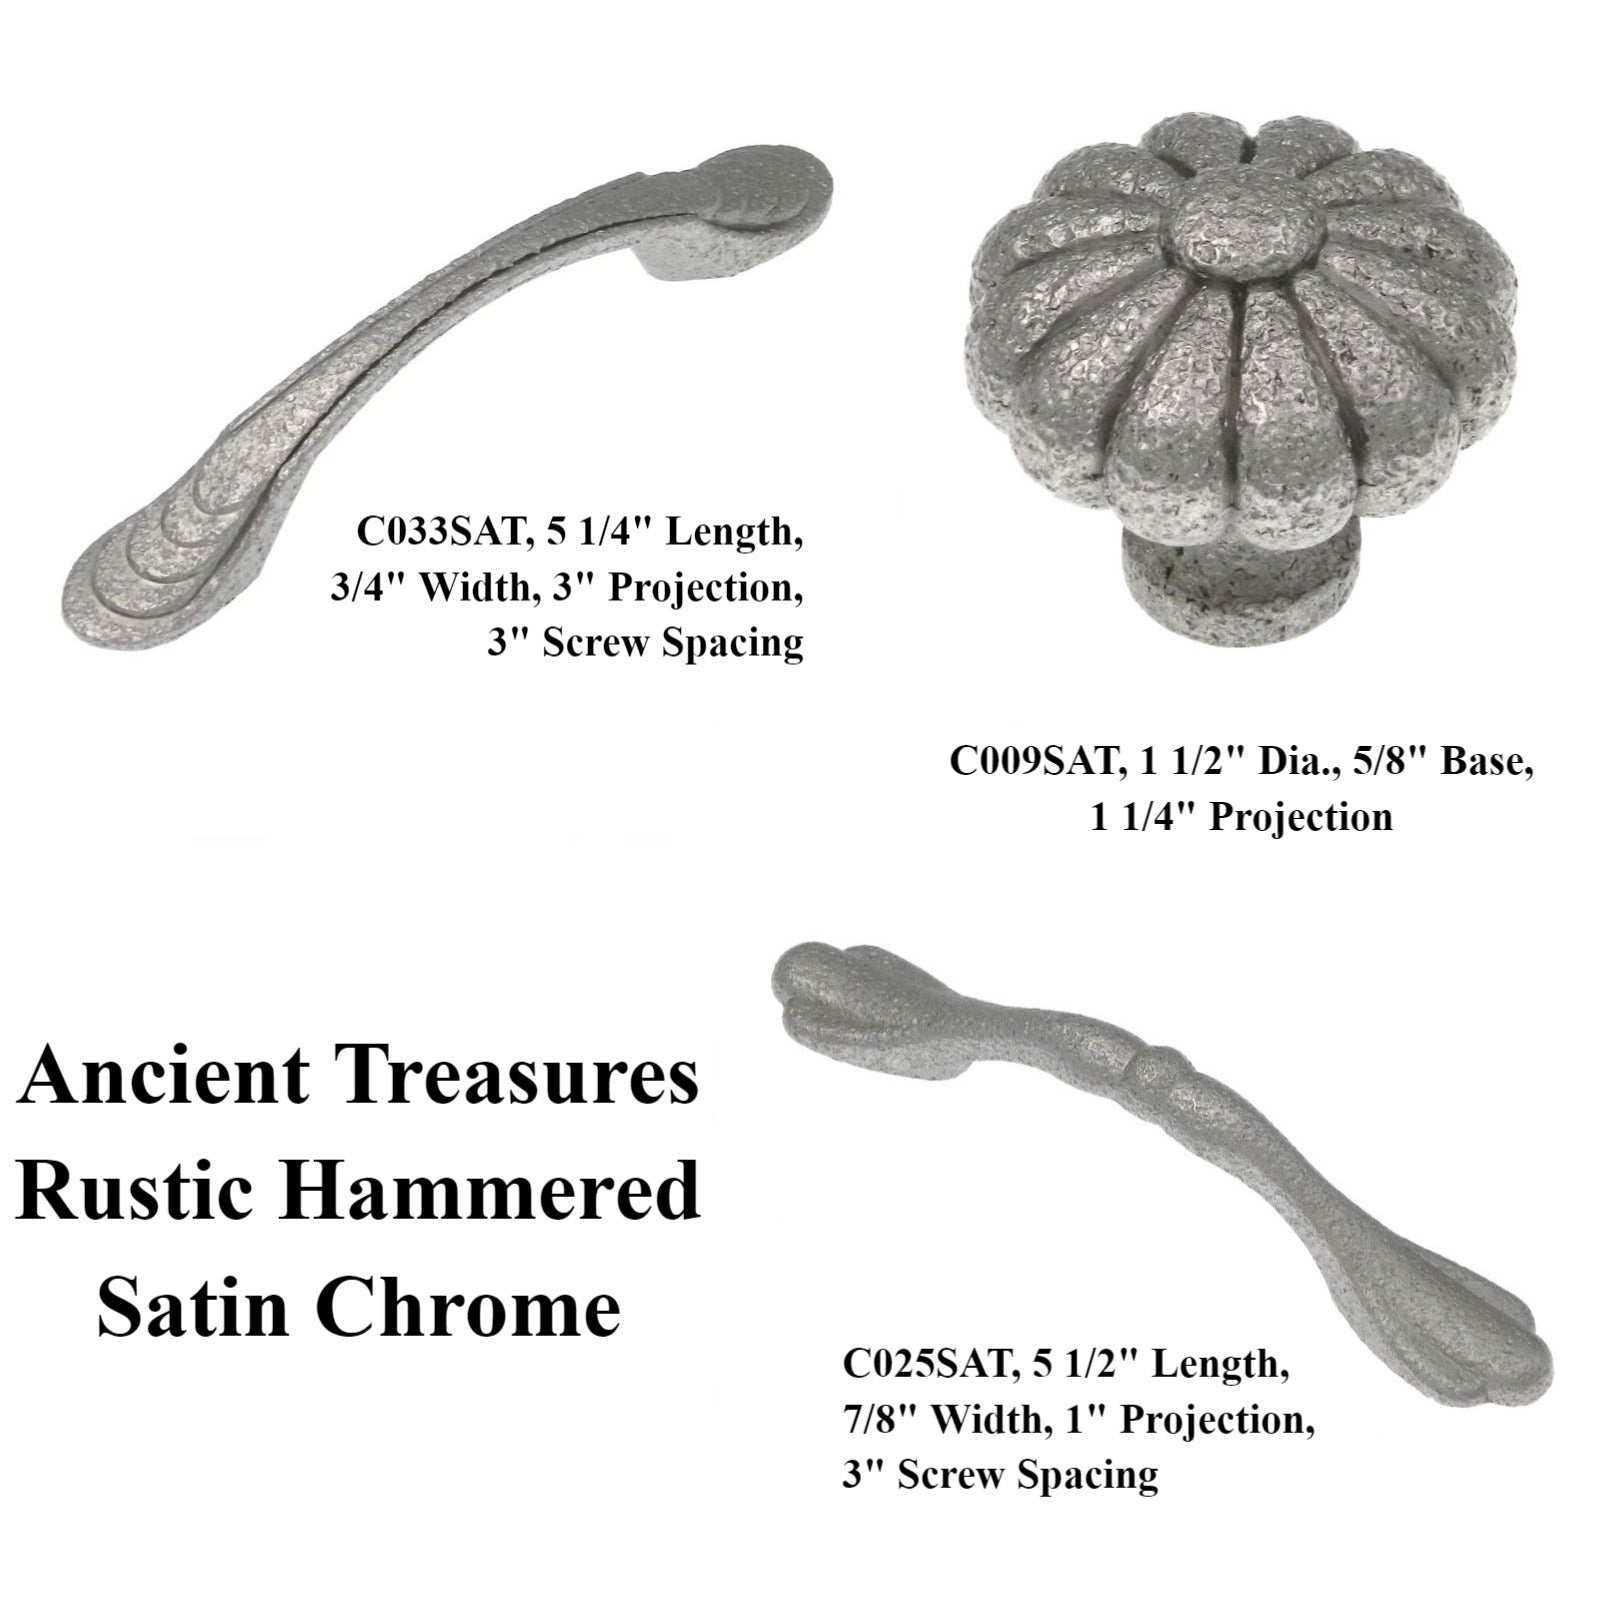 20 Pack of Ancient Treasures Rustic Hammered C033SAT Satin Chrome 3"cc Arch Pull